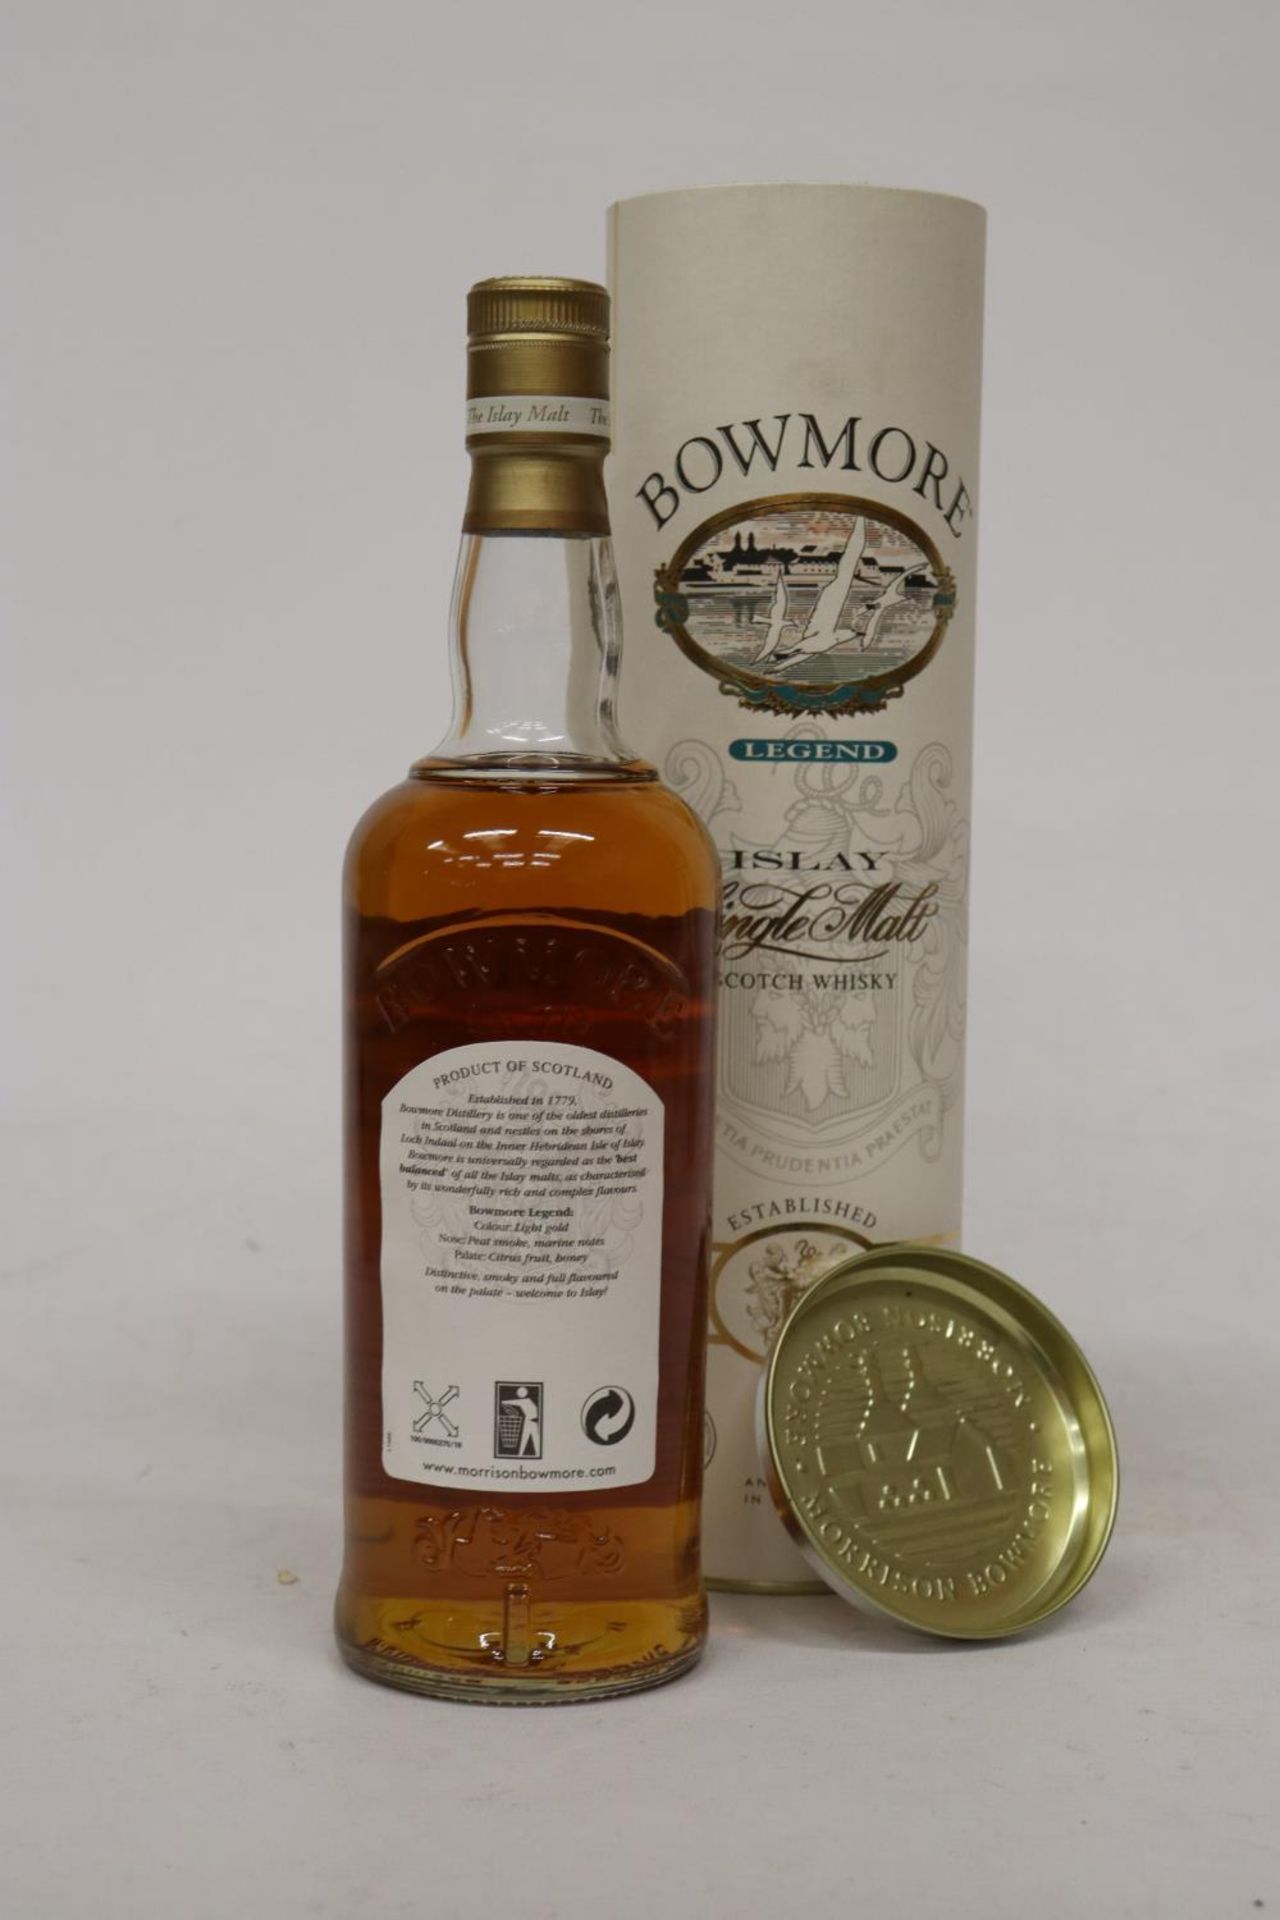 A BOTTLE OF BOWMORE LEGEND ISLAY SINGLE MALT WHISKY, BOXED - Image 2 of 5